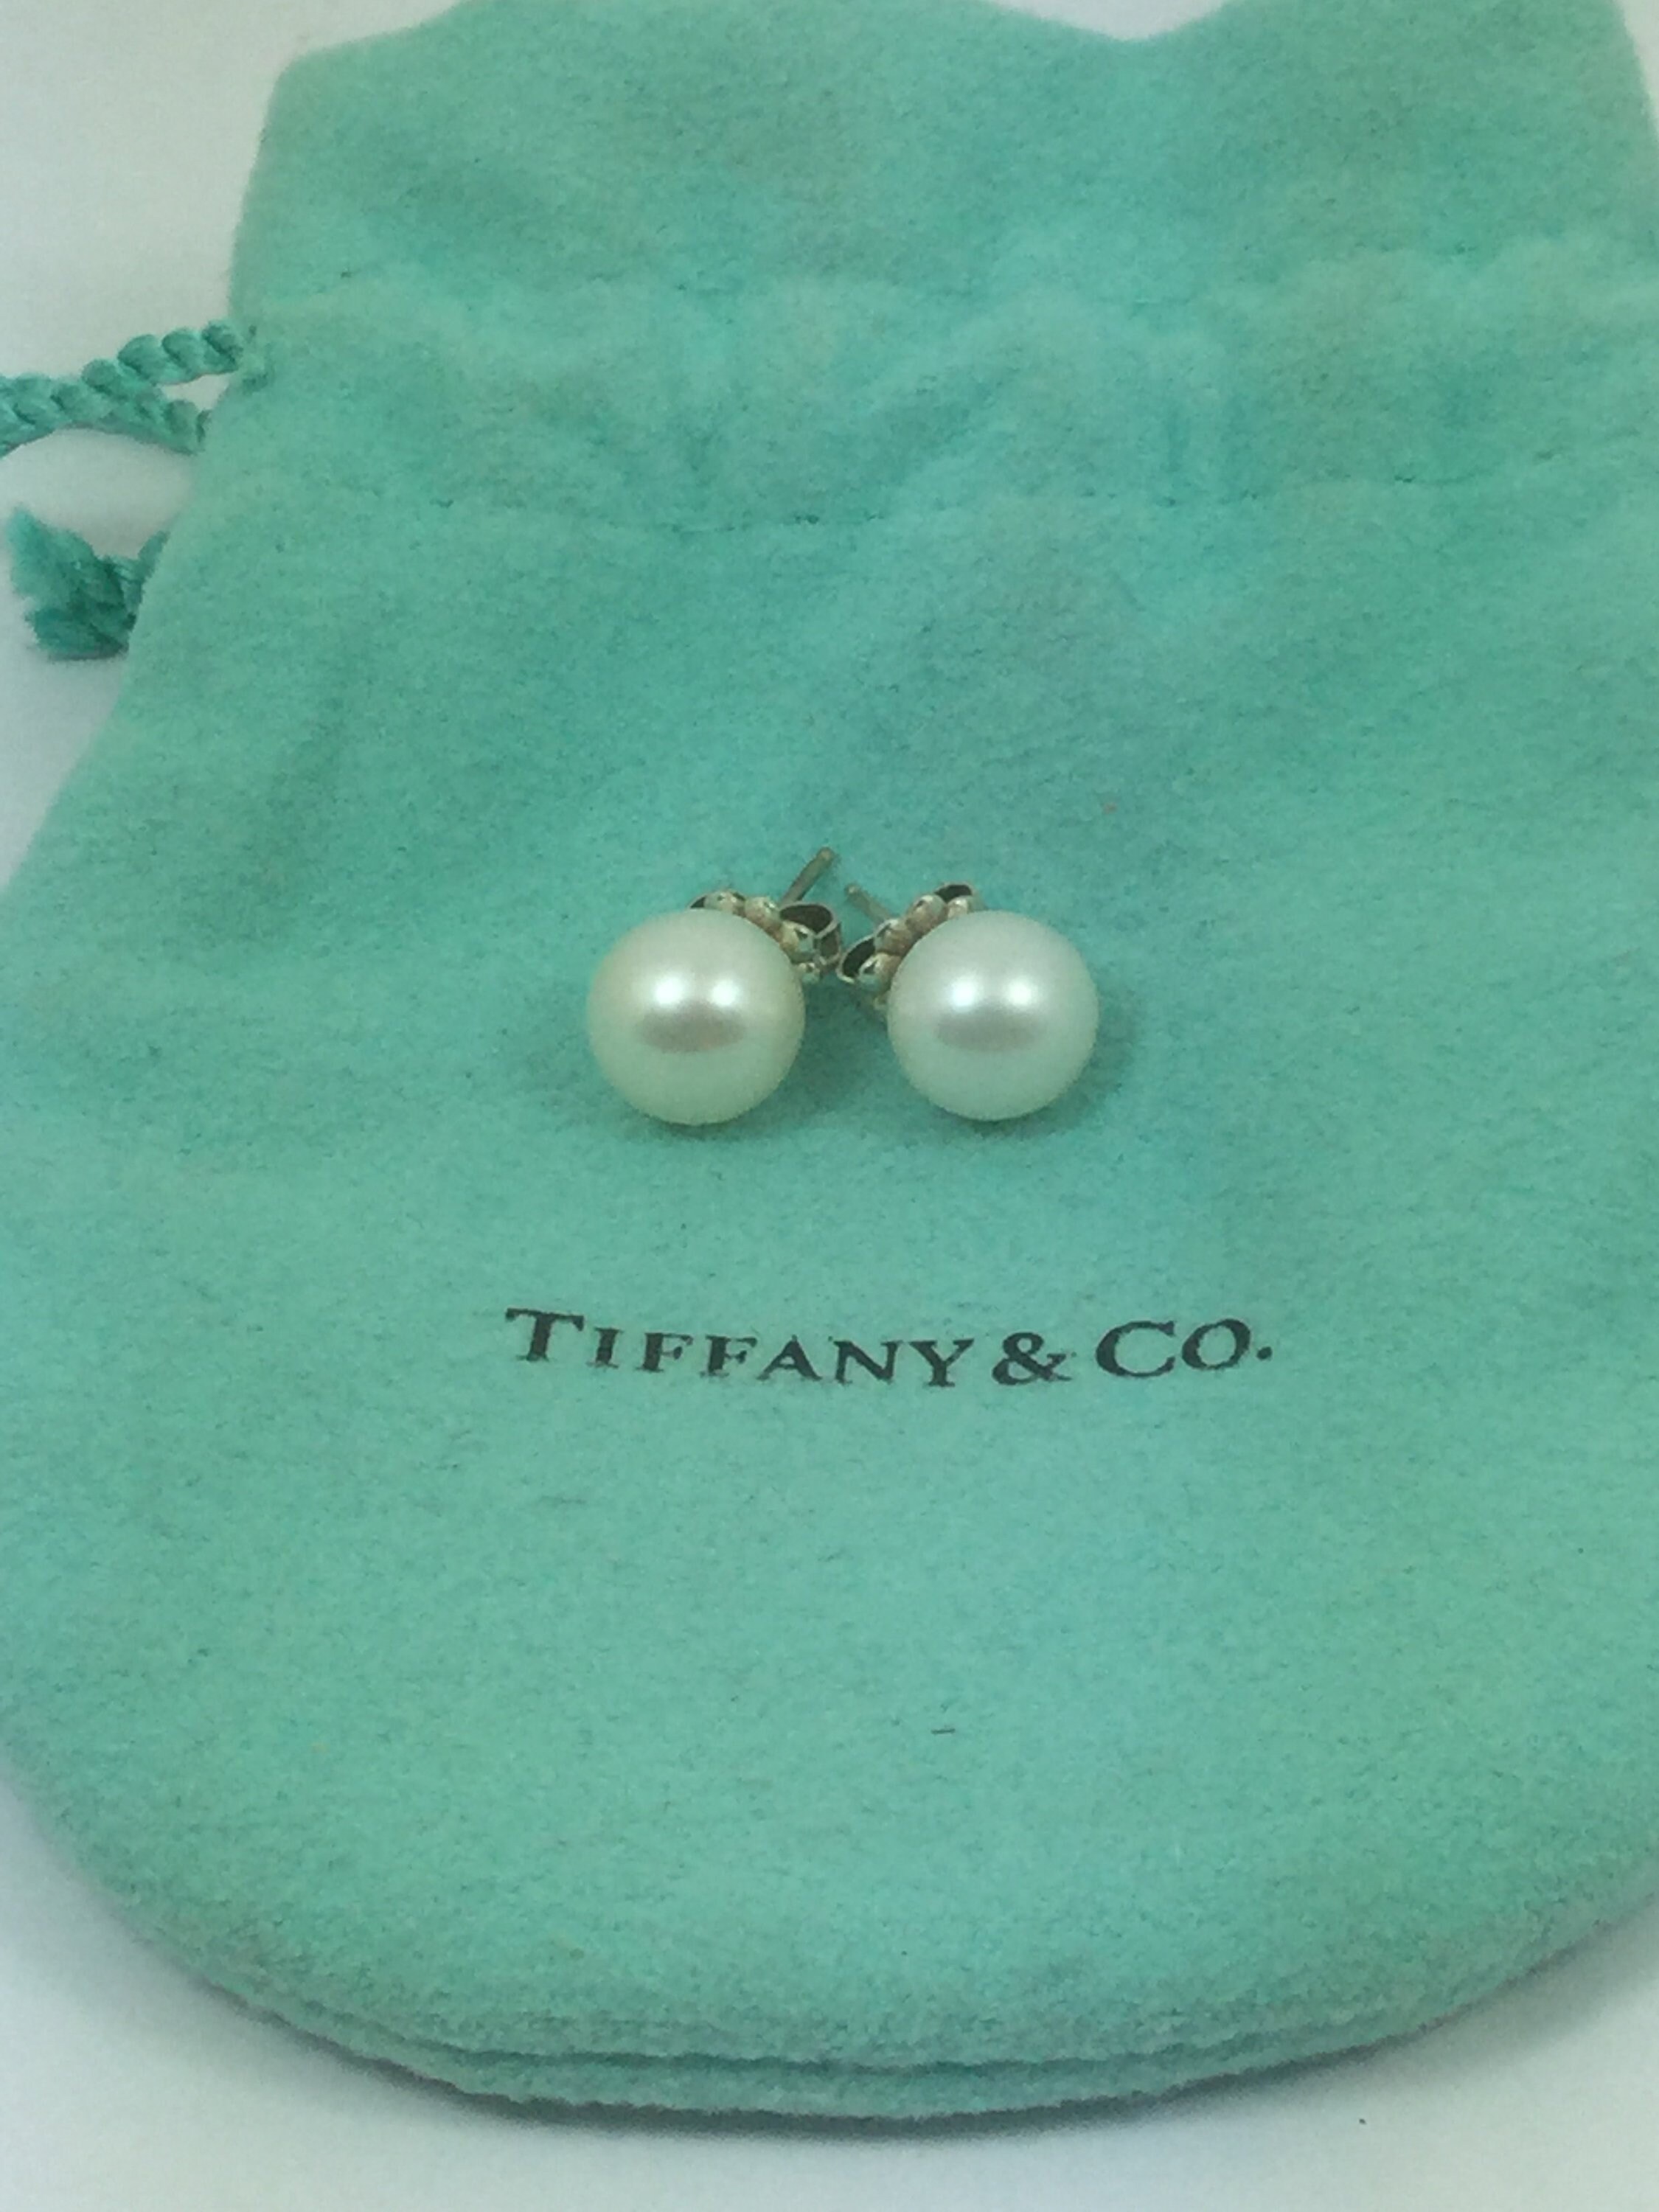 Tiffany And Co Silver And Pearl Earrings Etsy